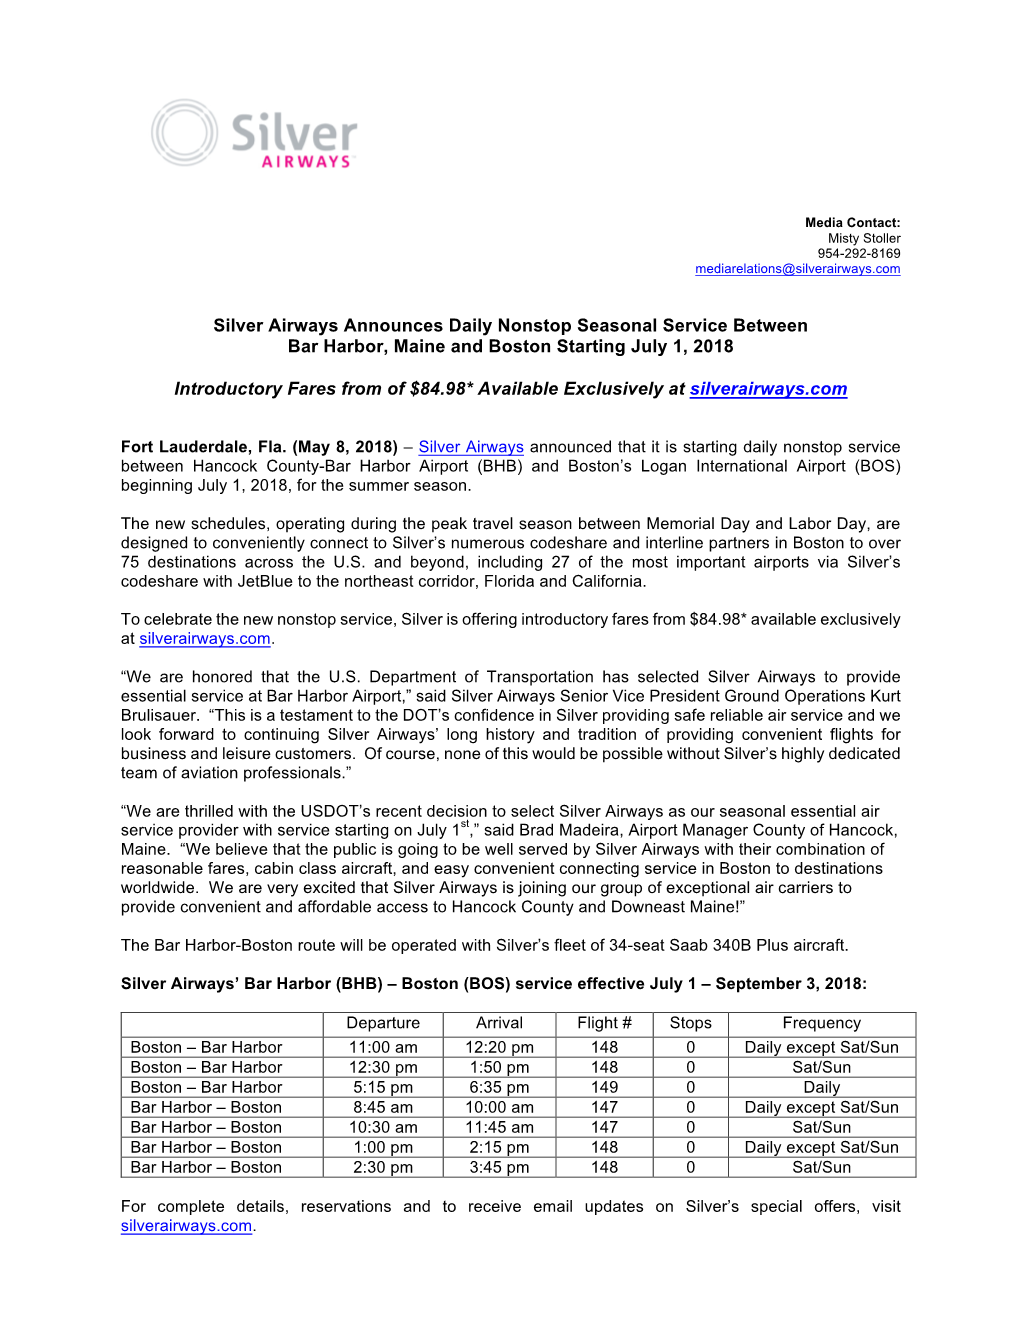 Silver Airways Announces Daily Nonstop Seasonal Service Between Bar Harbor, Maine and Boston Starting July 1, 2018